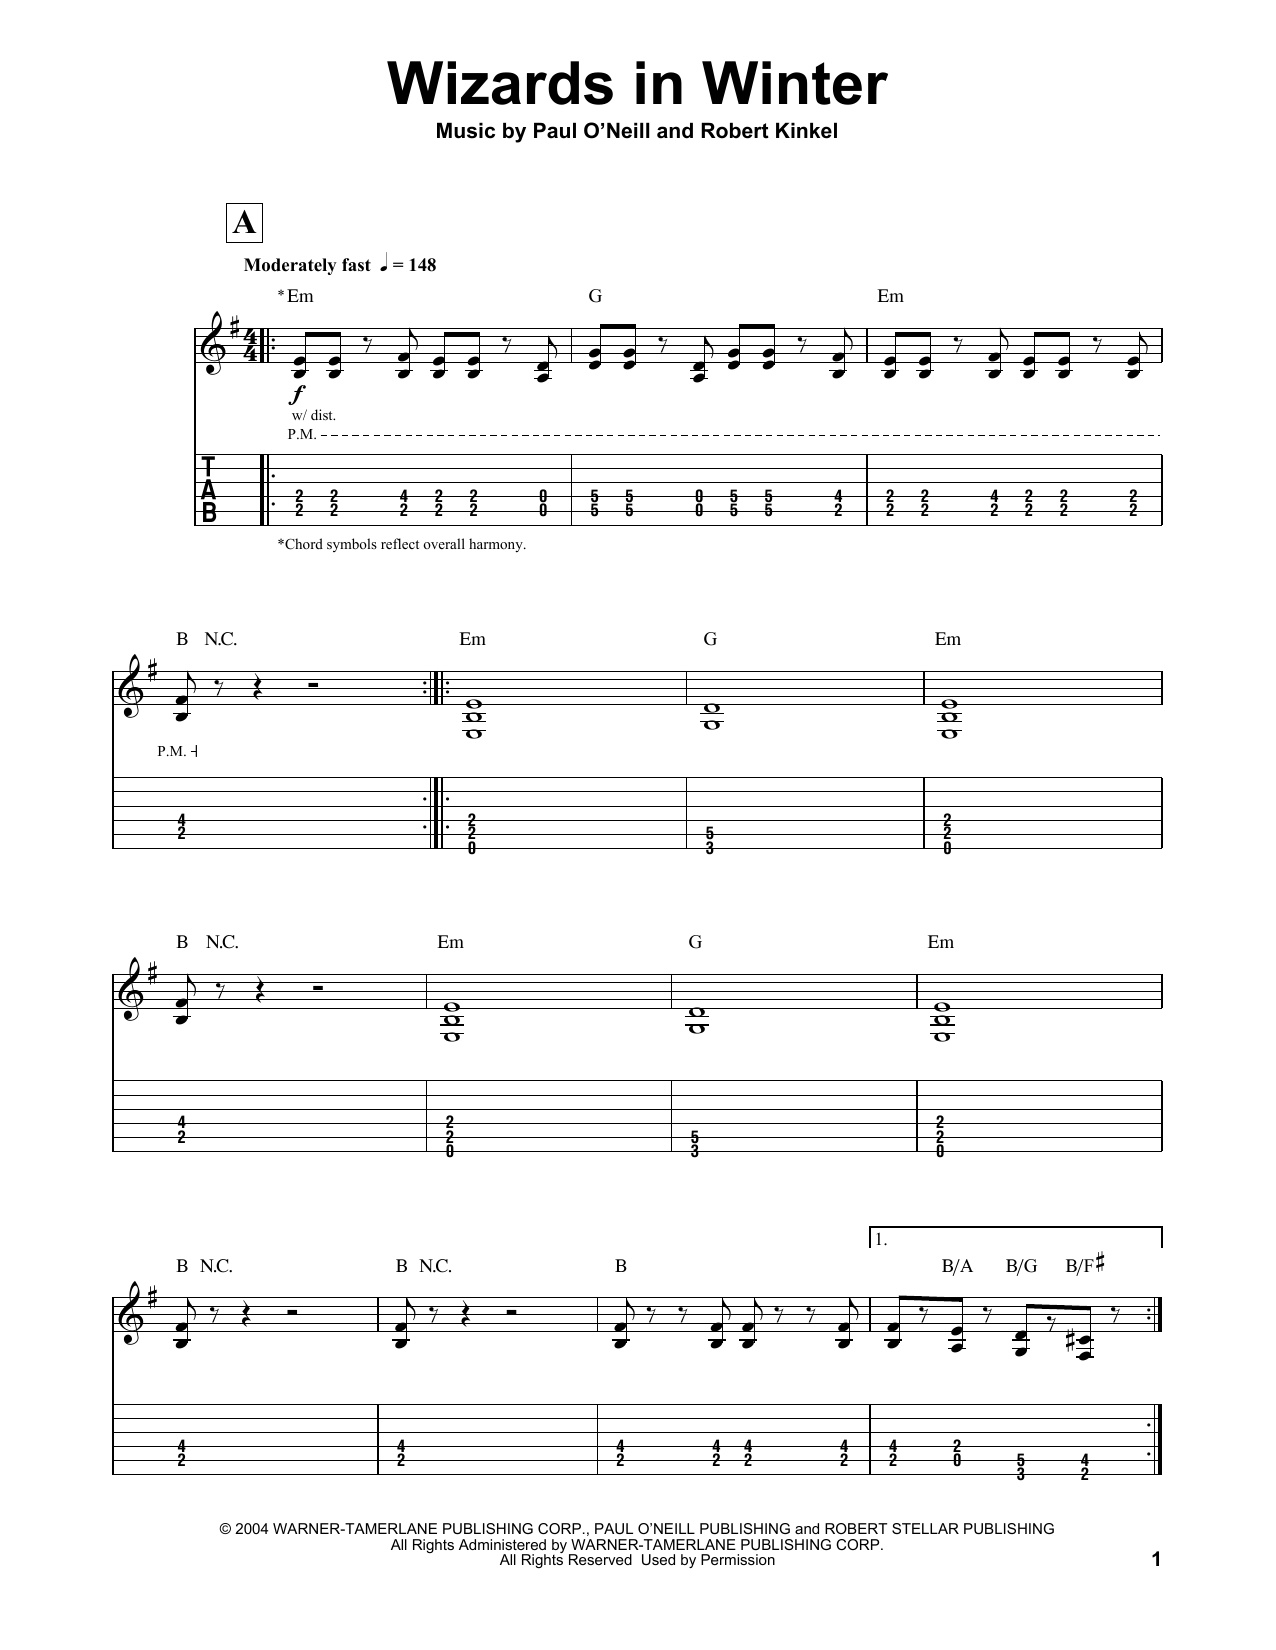 Download Trans-Siberian Orchestra Wizards In Winter Sheet Music